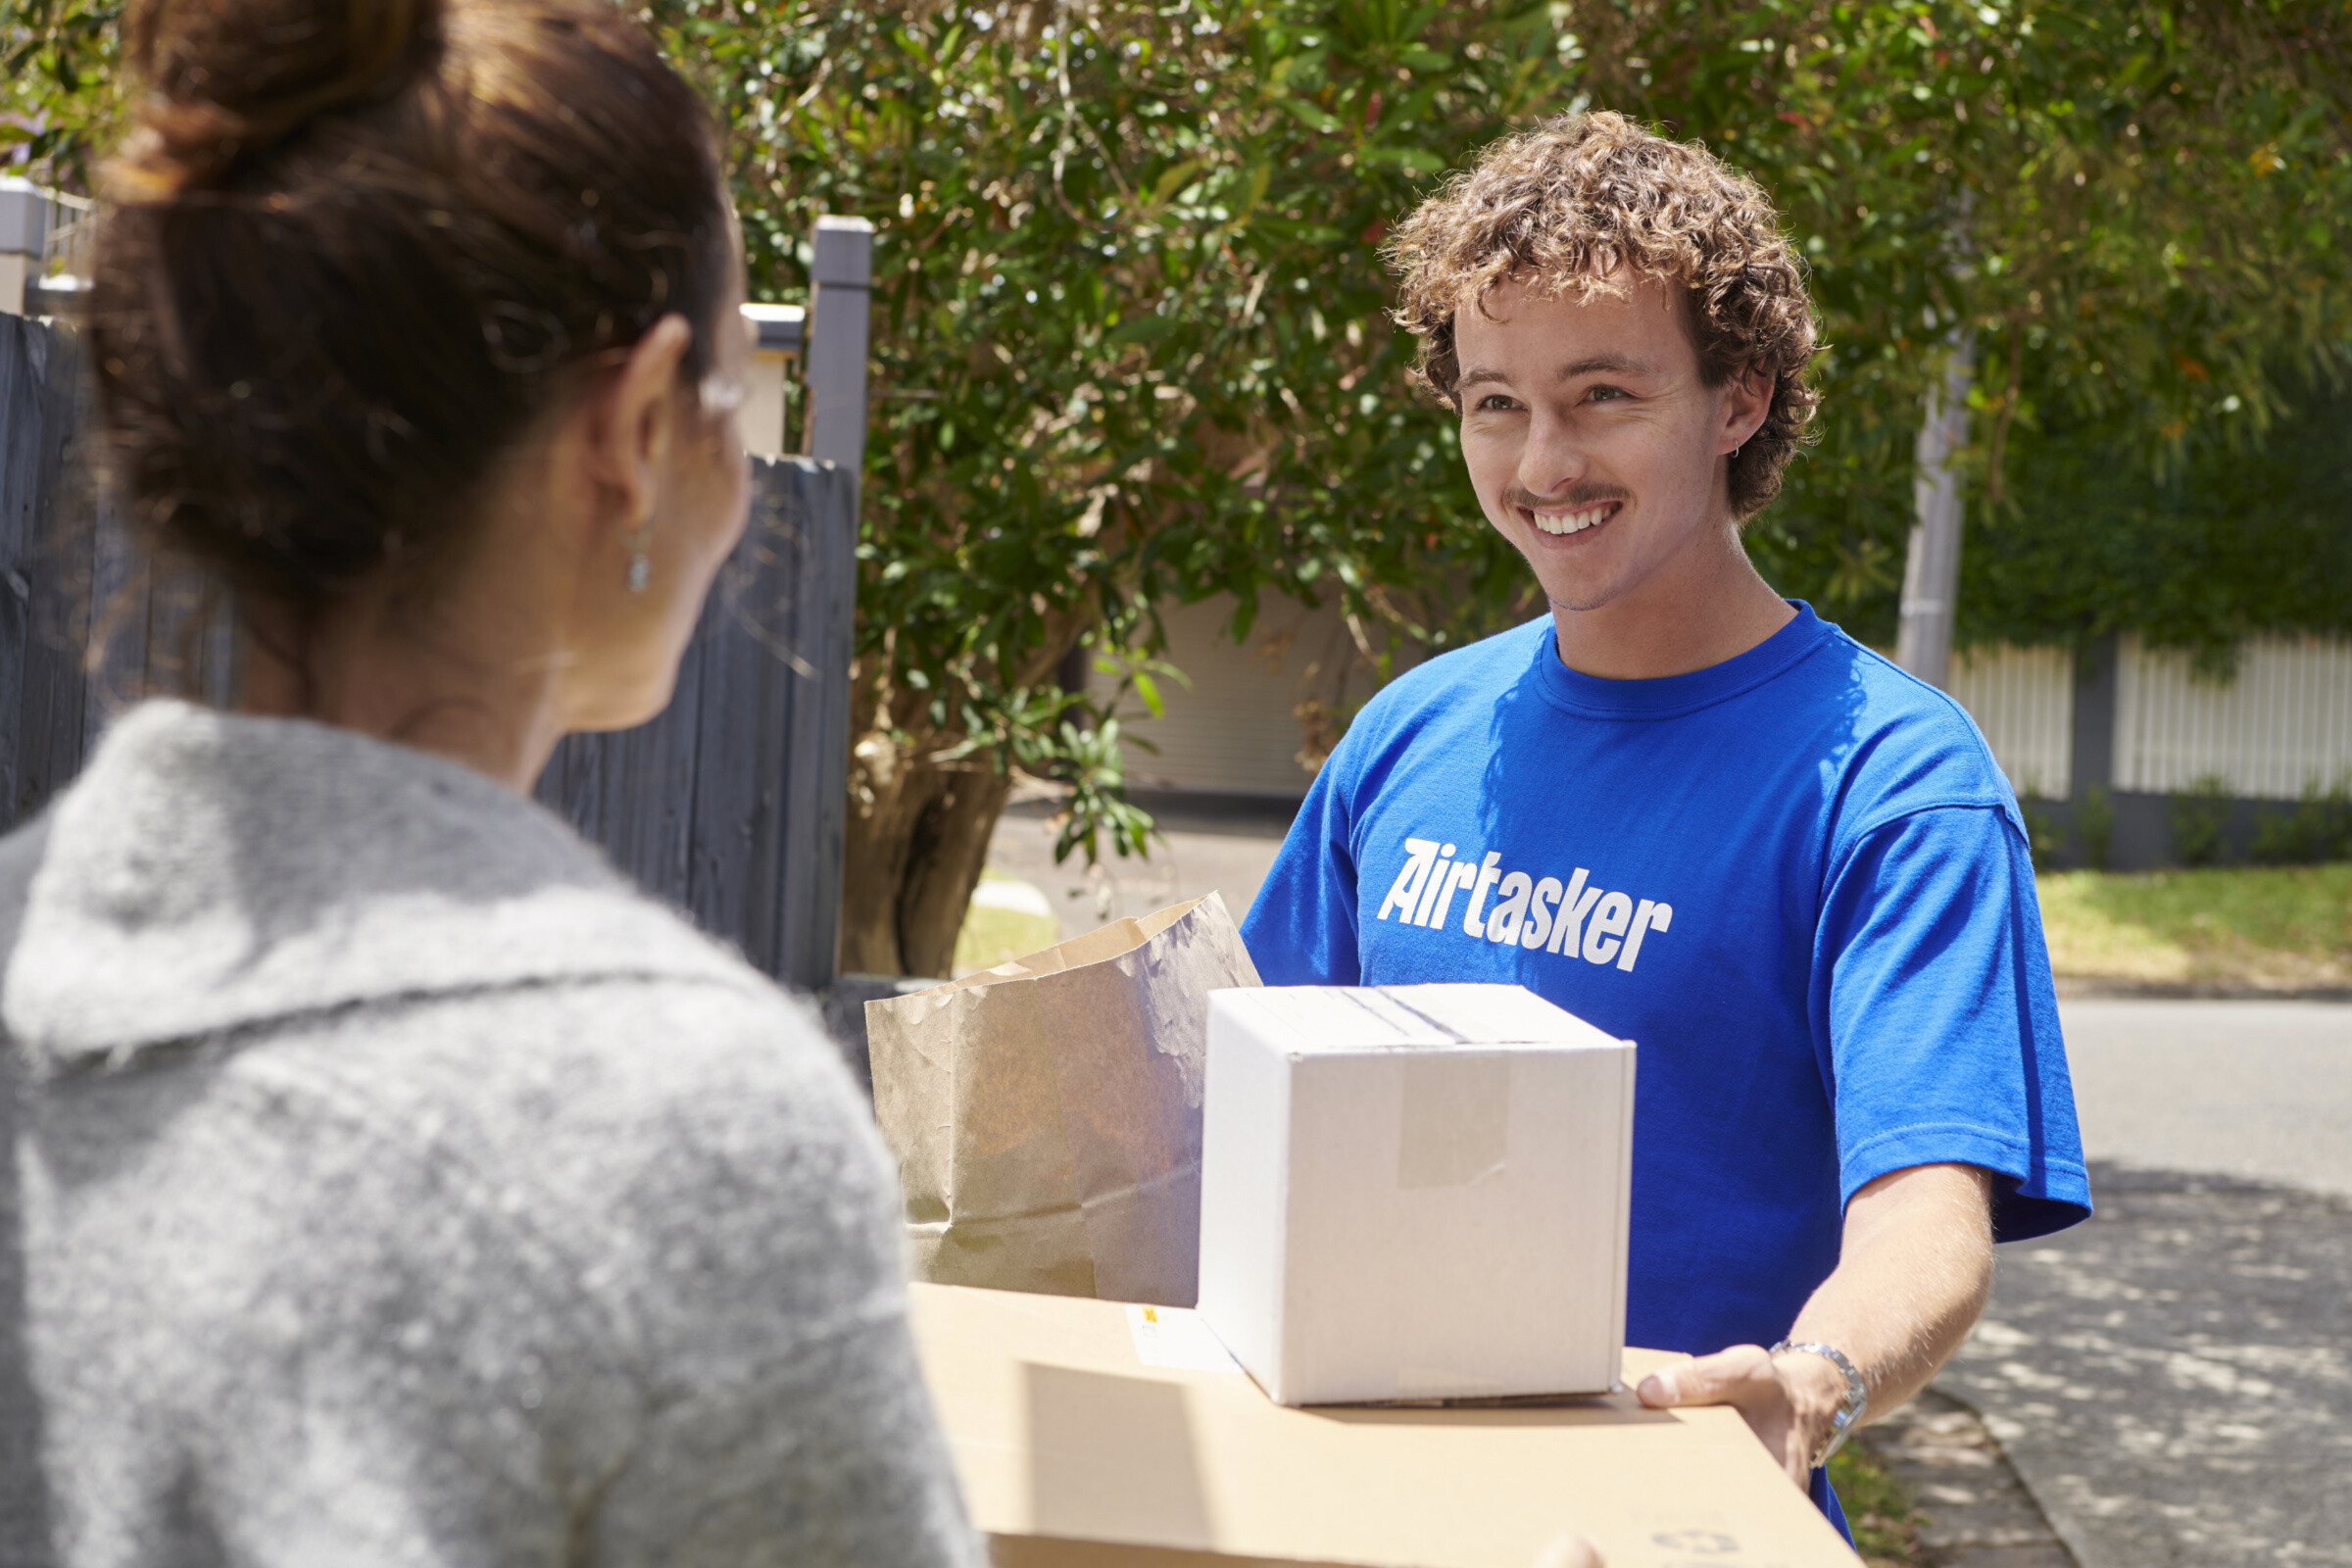 A delivery courier handing off packages to the recepient.